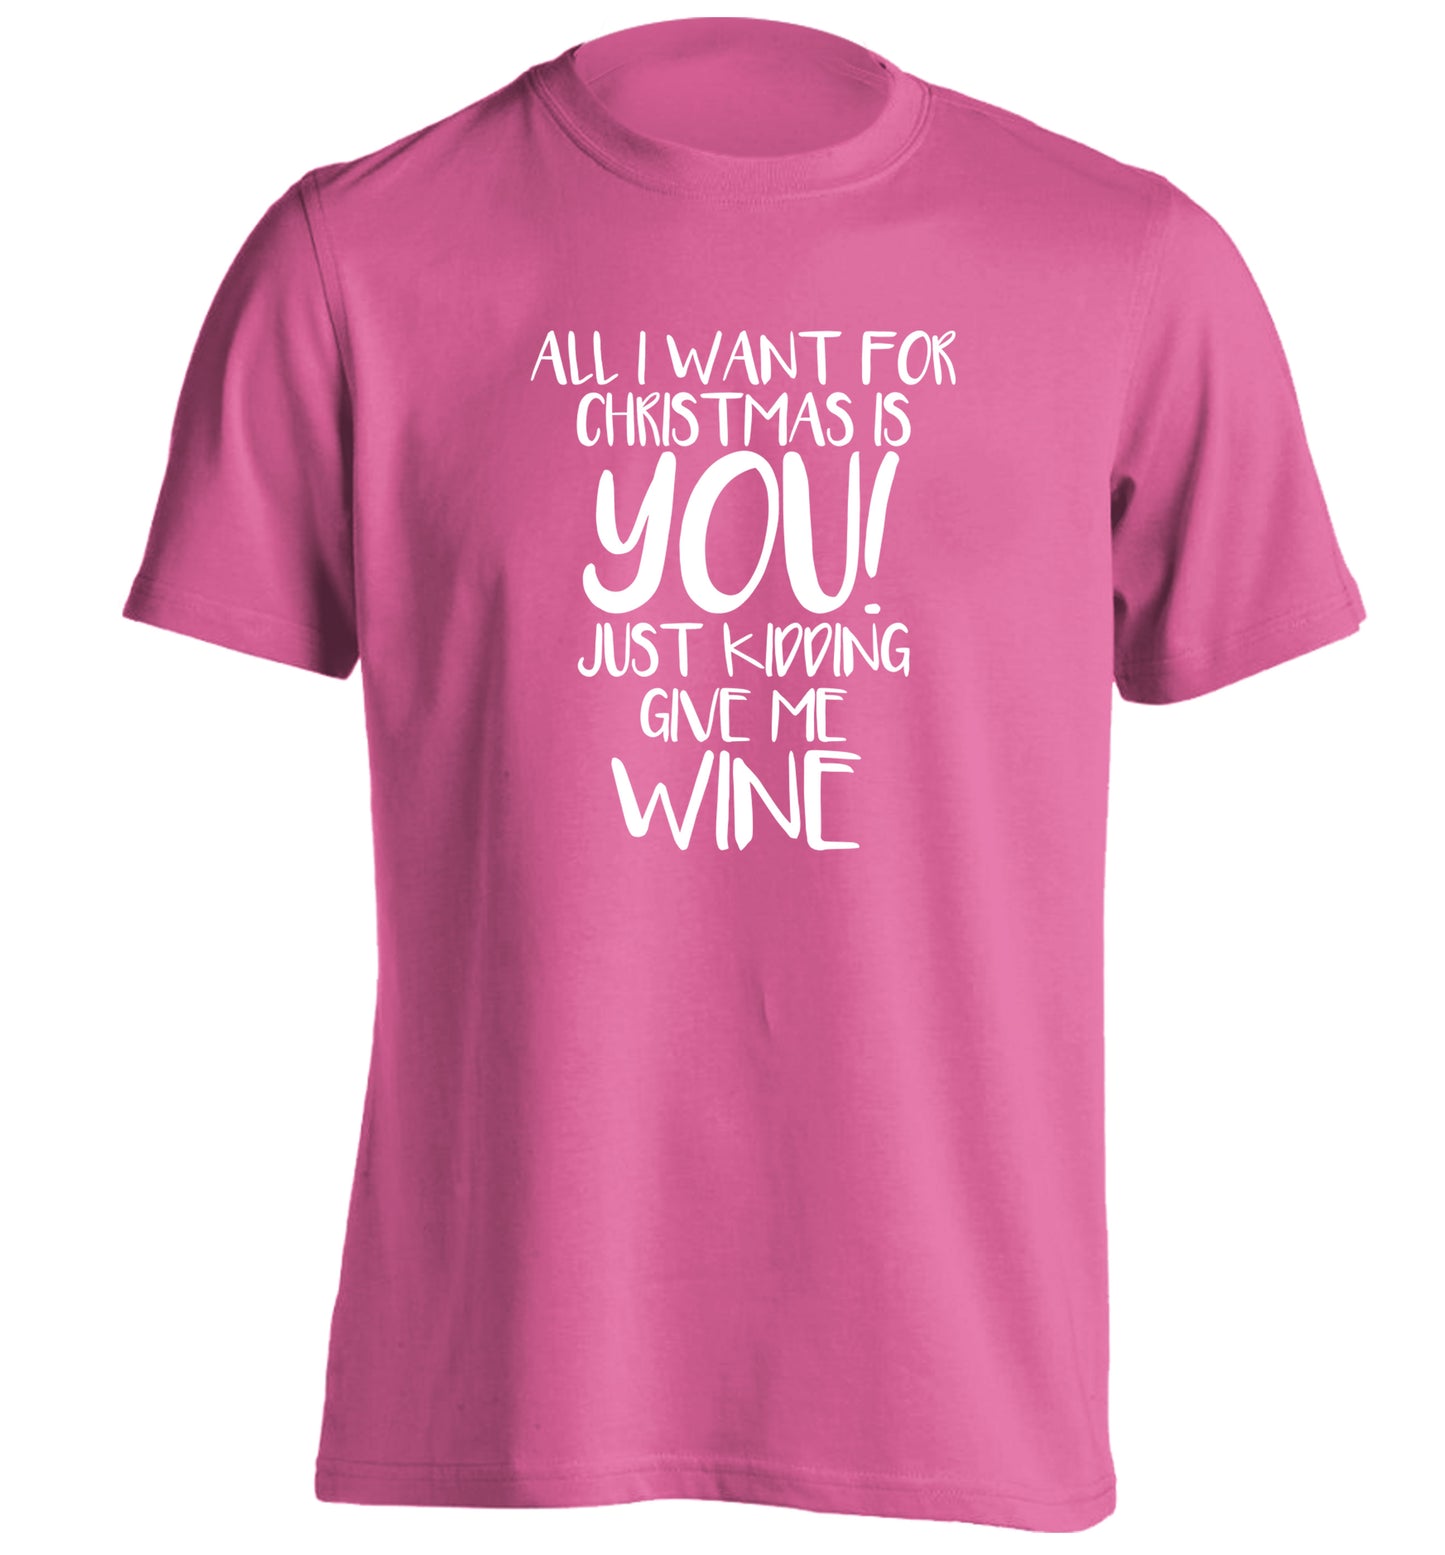 All I want for christmas is you just kidding give me the wine adults unisex pink Tshirt 2XL